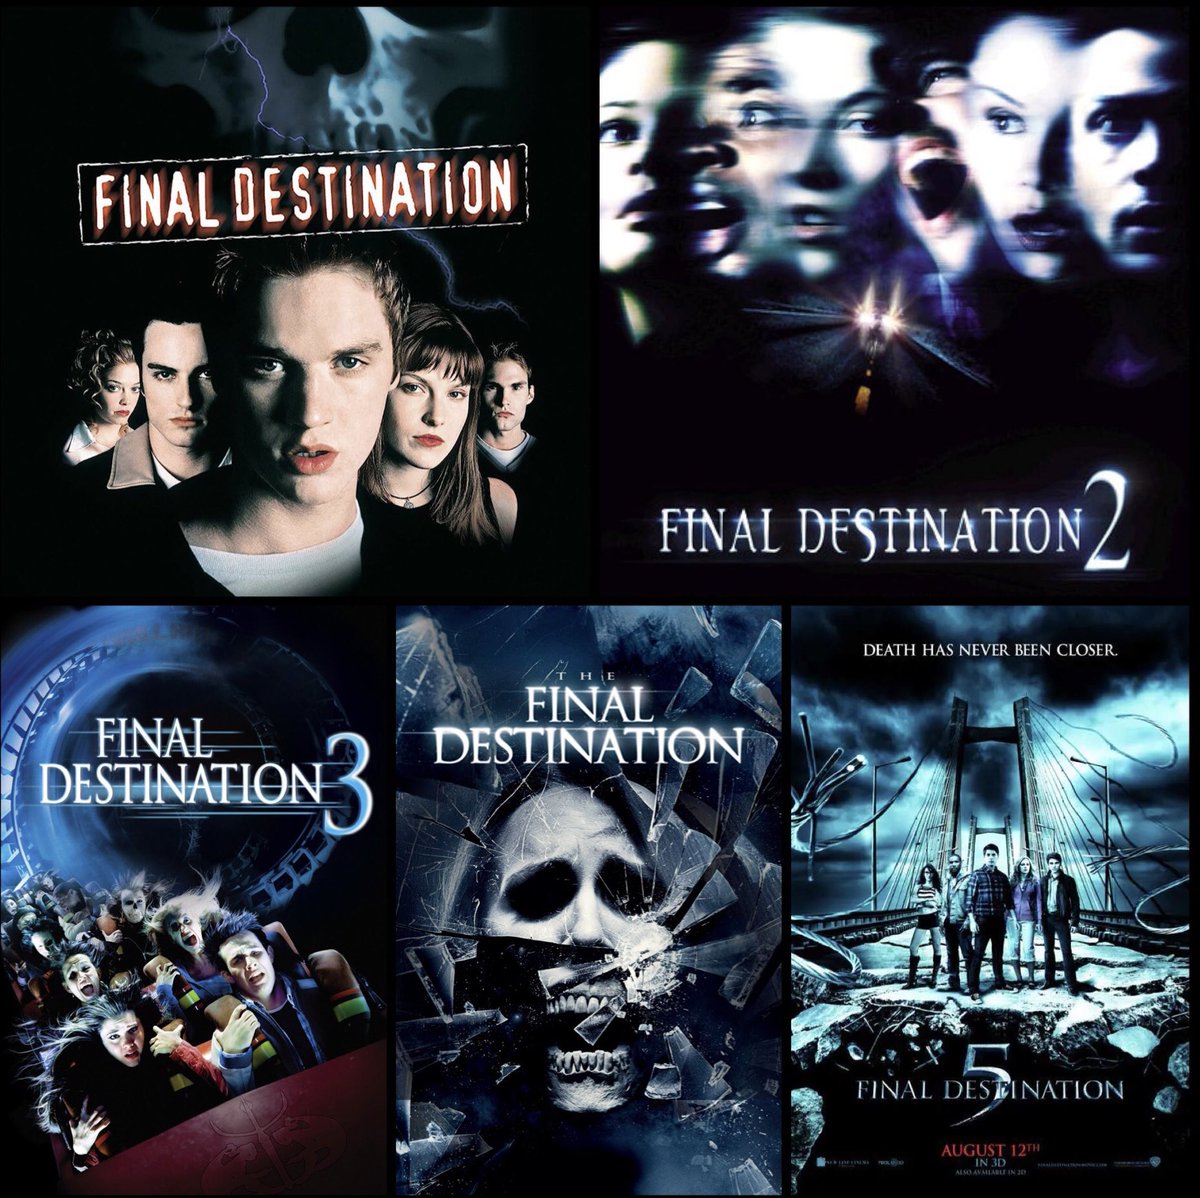 What is your favorite Final Destination film? Rank all 5?